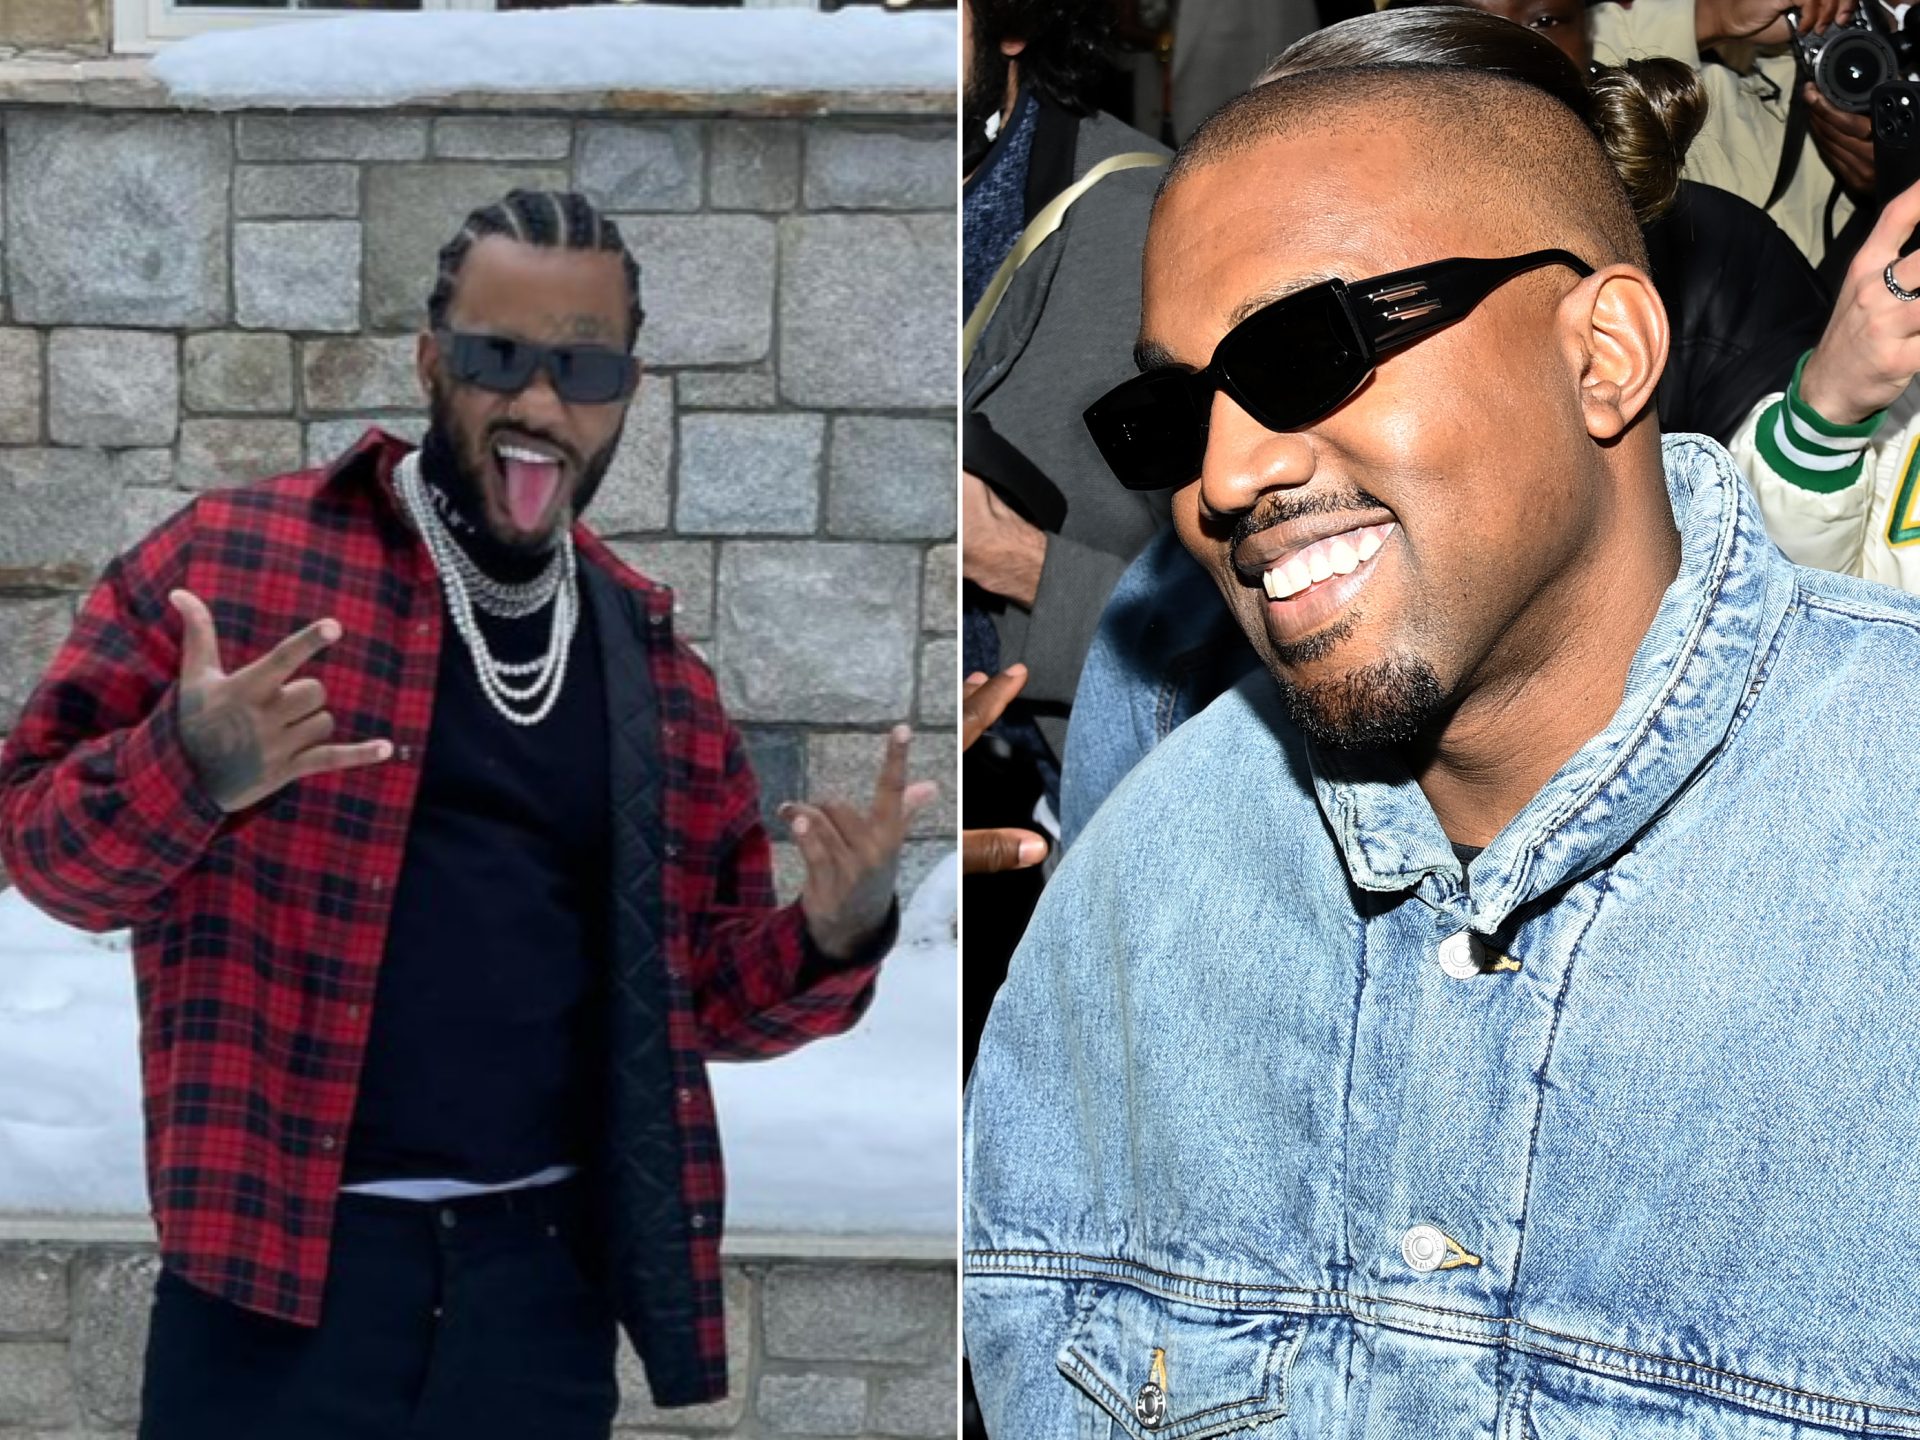 The Game and Kanye West release the music video for "Eazy," which has a character that appears to be Pete Davidson.